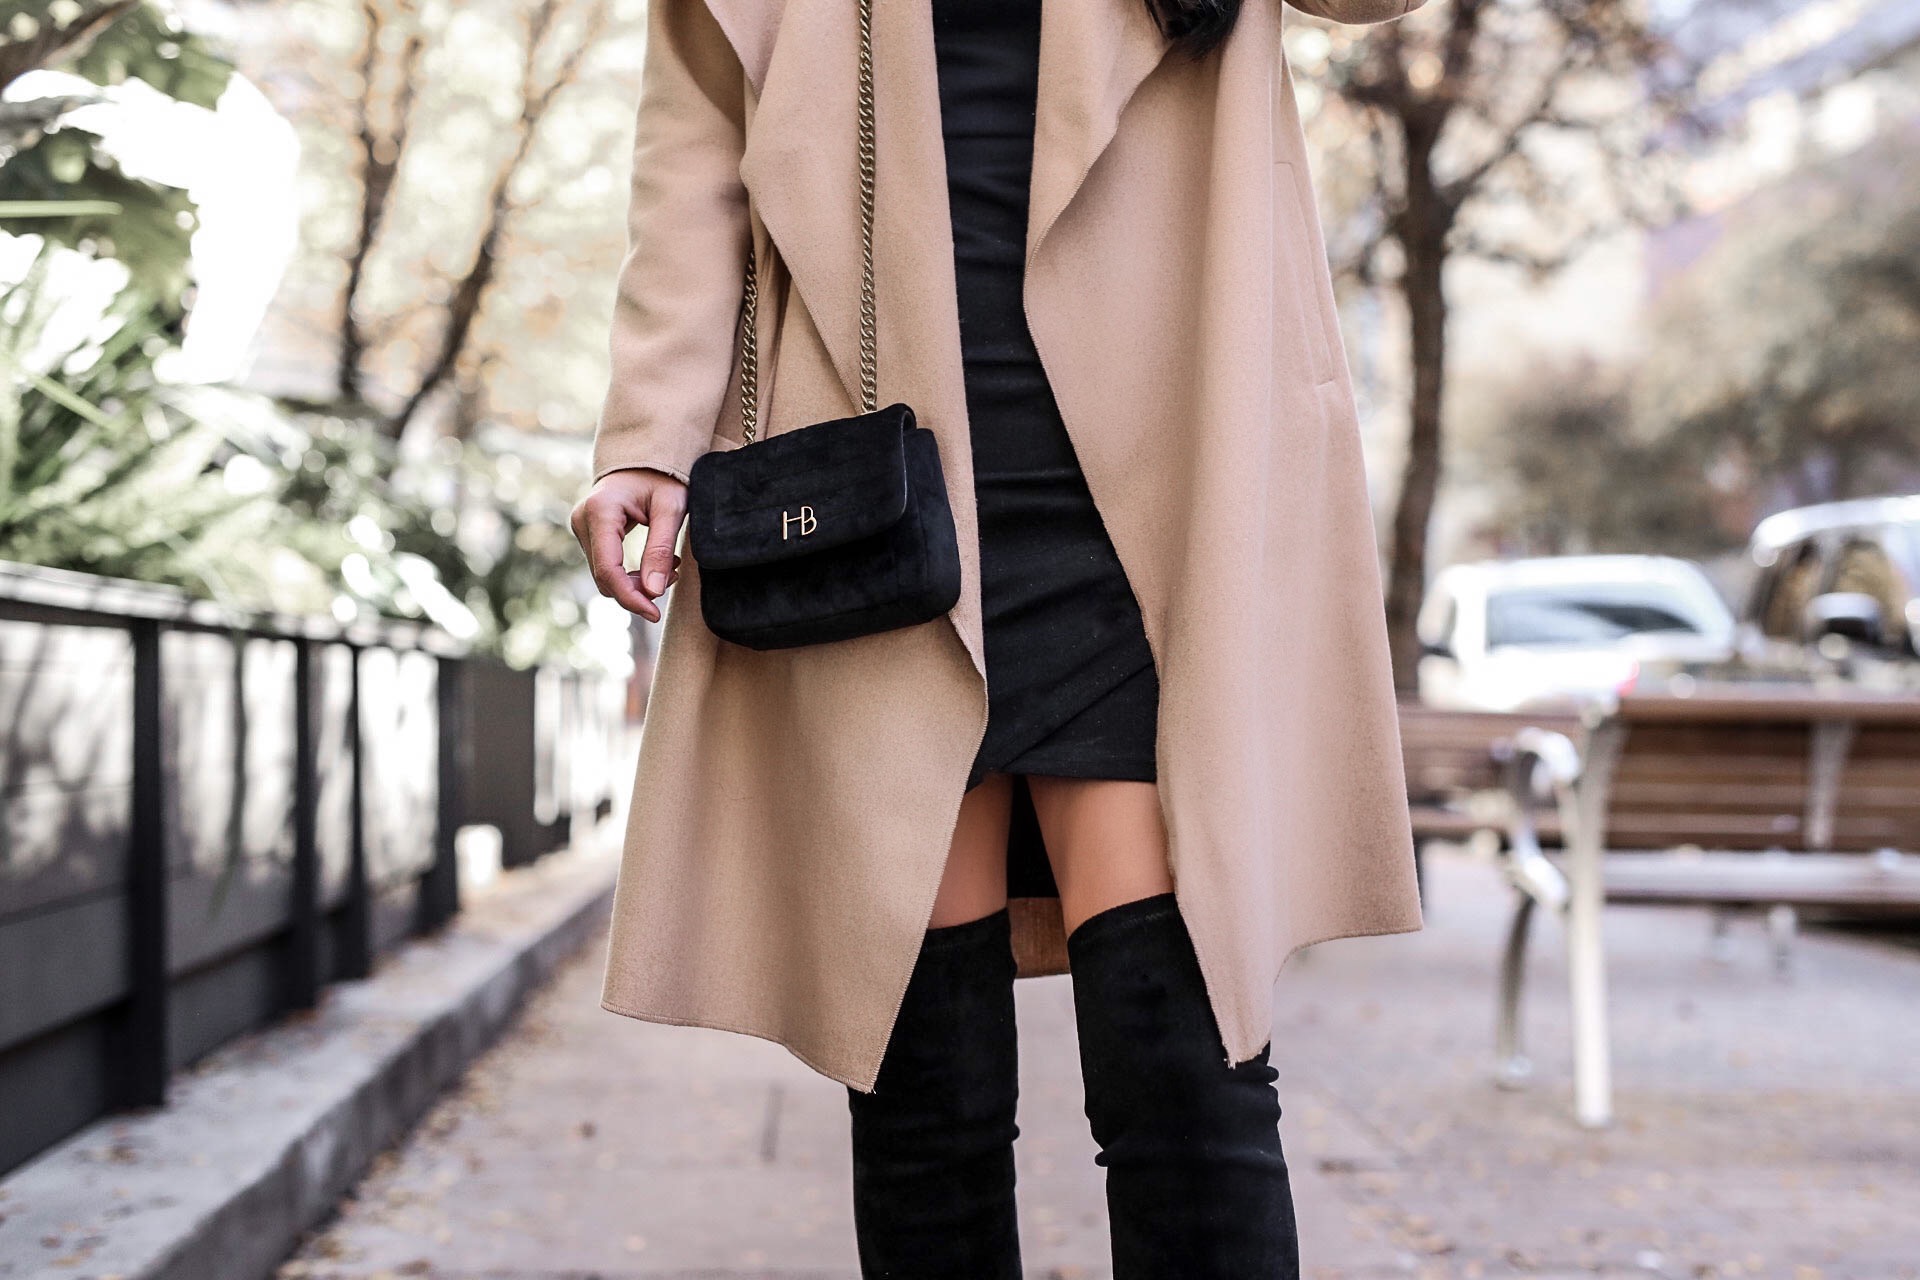 DTKAustin shares her top affordable coats from Chicwish that are under $100. Handbag from Henri Bendel, OTK boots from Goodnight Macaroon. -  10 Must-Have Classic Affordable Coats for Winter by Austin fashion blogger Dressed to Kill